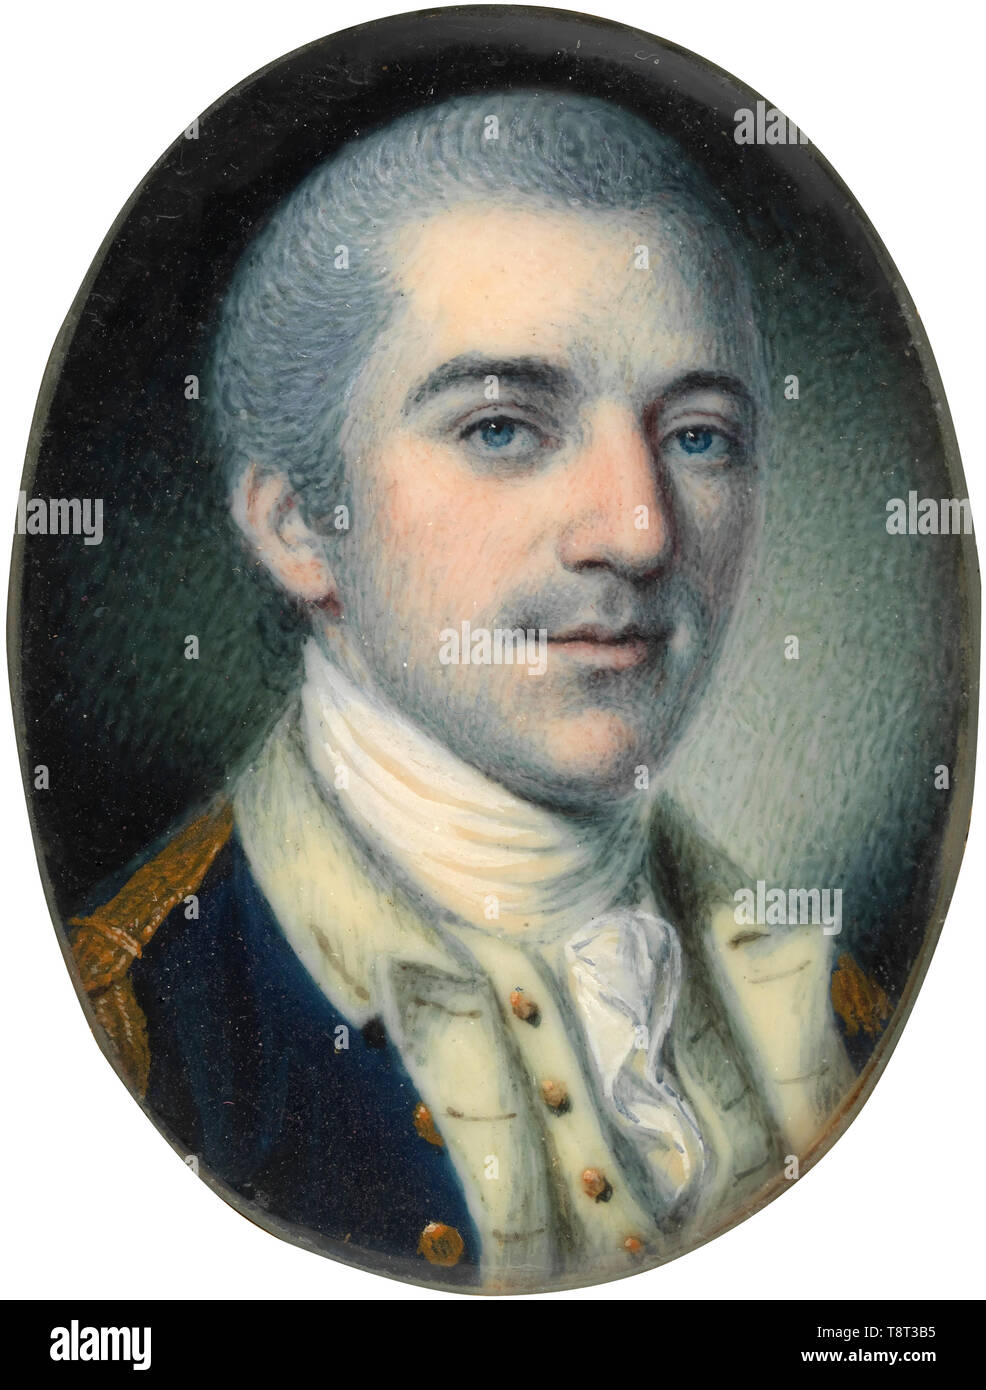 John Laurens (1754 – 1782) American soldier and statesman from South Carolina during the American Revolutionary War, portrait of Laurens, by Charles Willson Peale Stock Photo